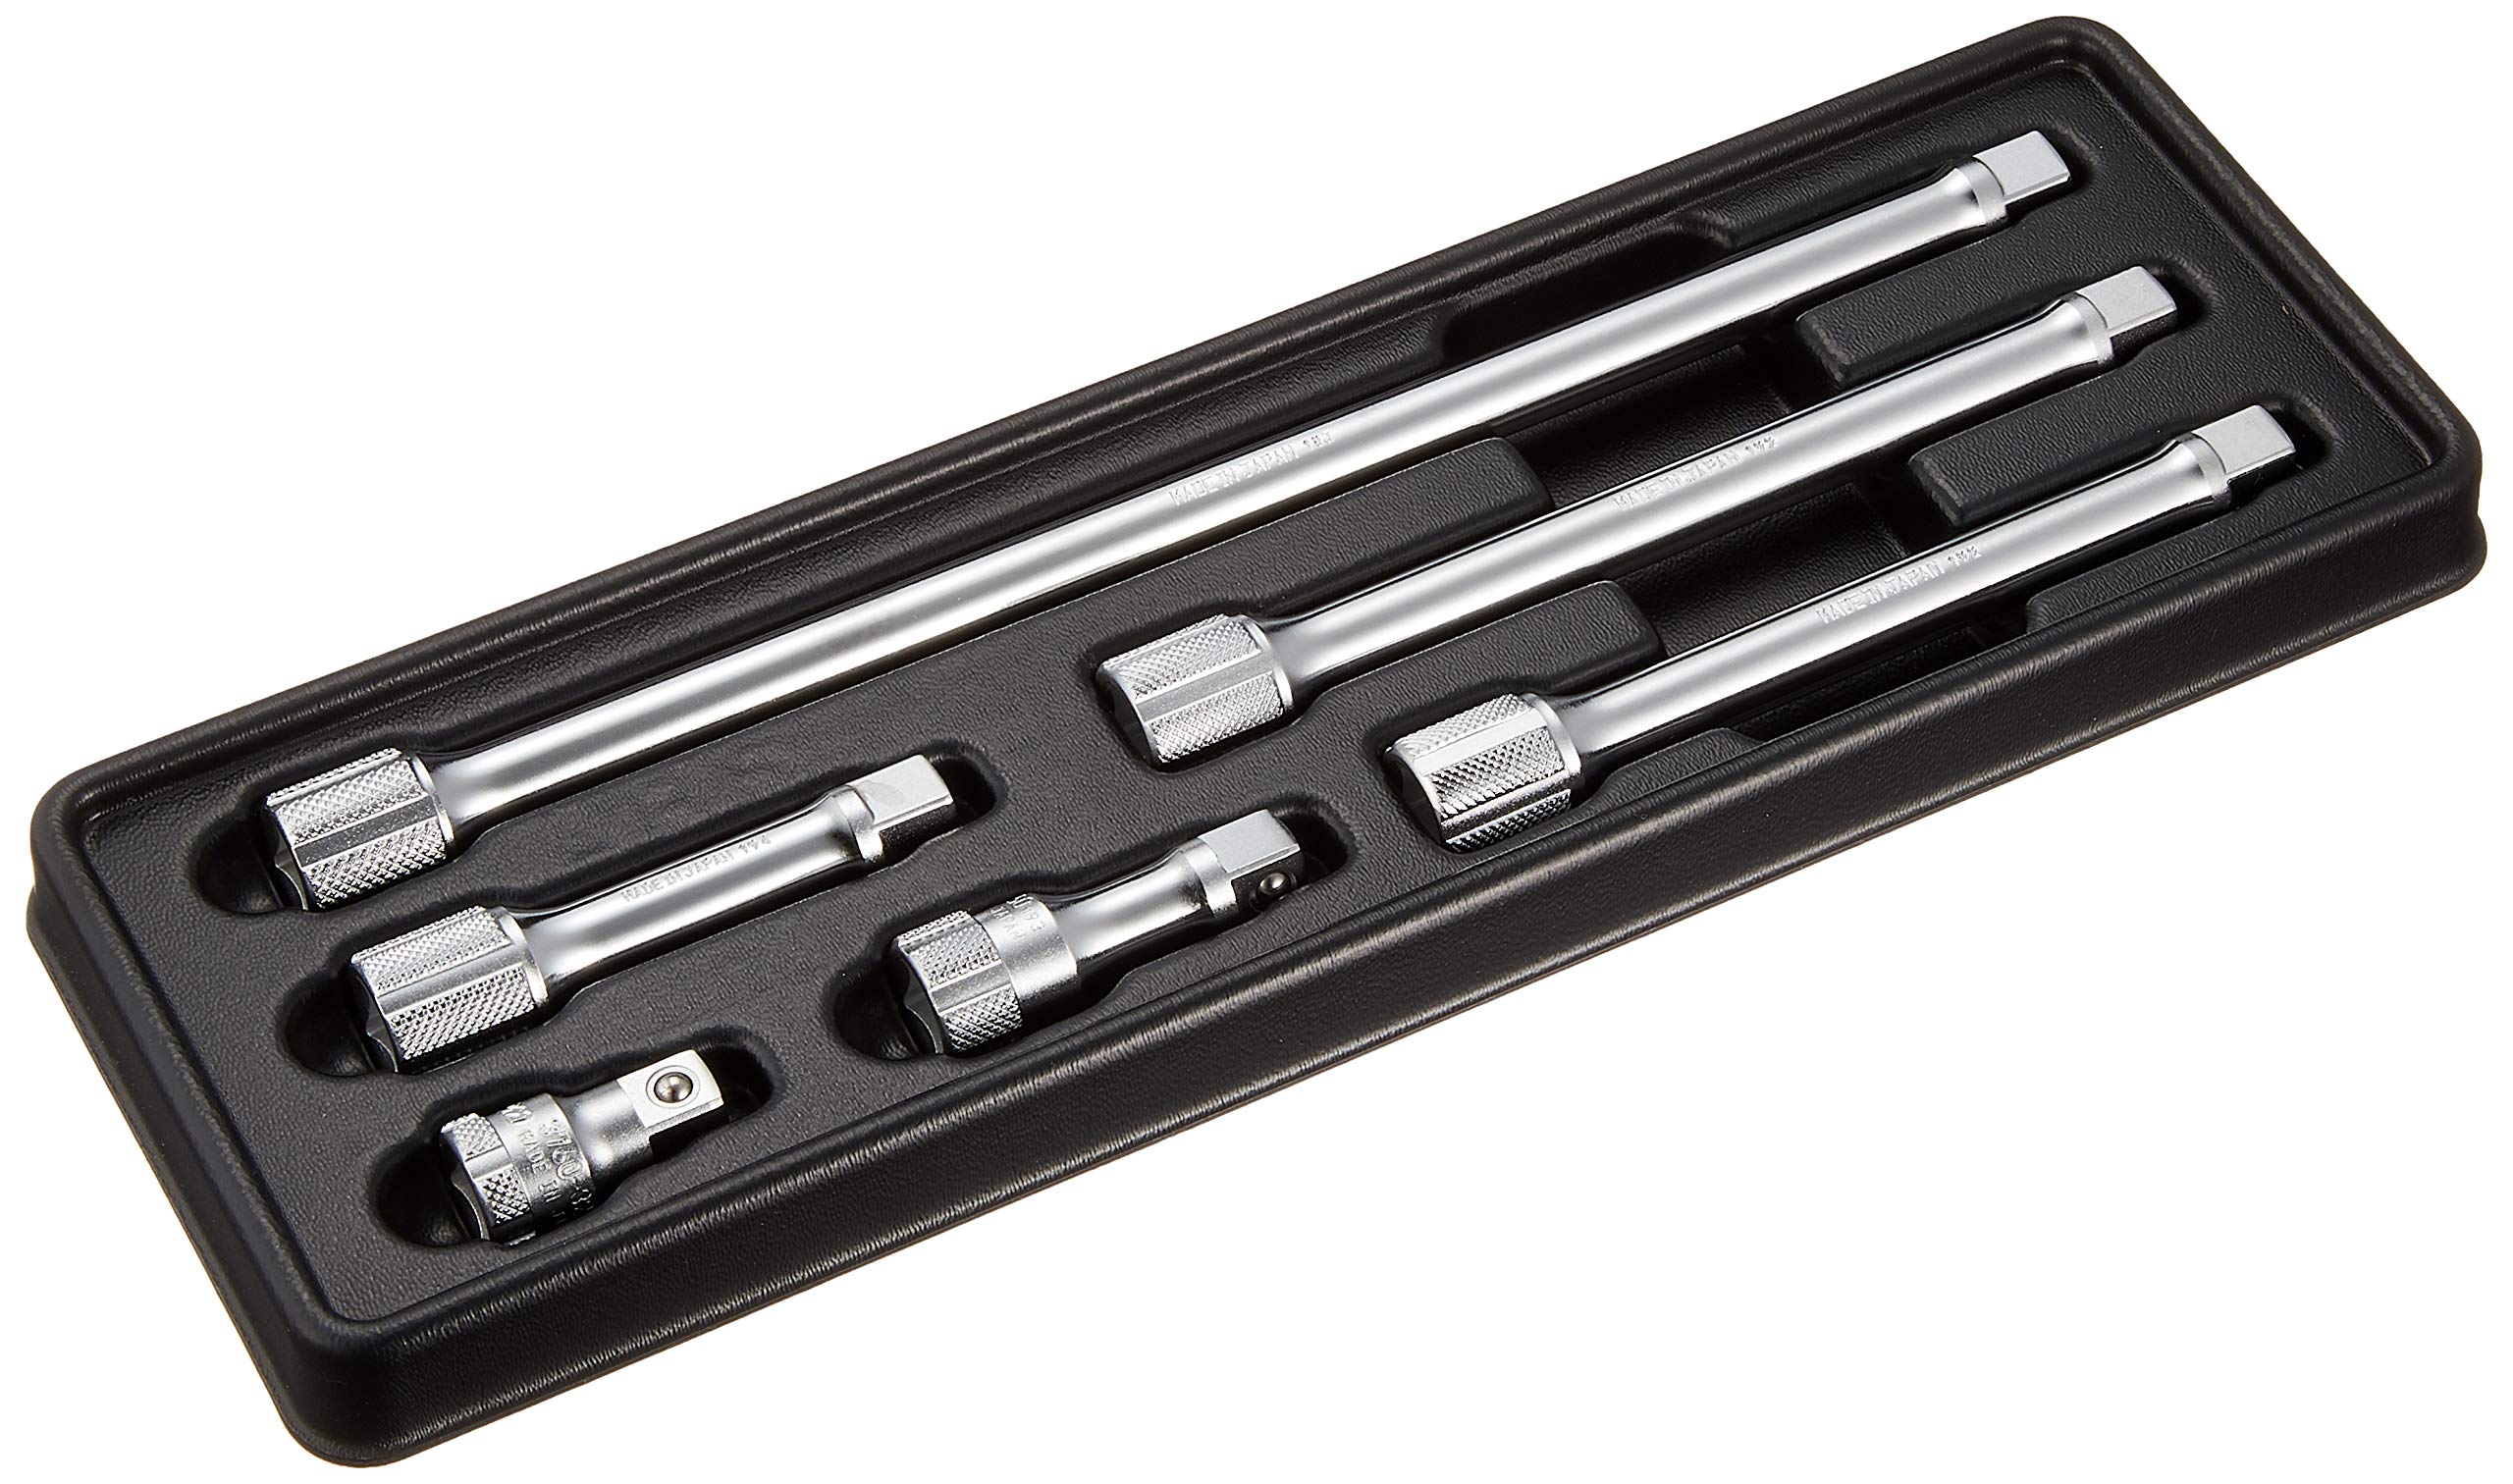 Koken (Japan) Extension Bar PK3760/6 -- 3/8" Ratchet Extensions (6 Count) $56.56 Shipped Free from Amazon Japan $56.55